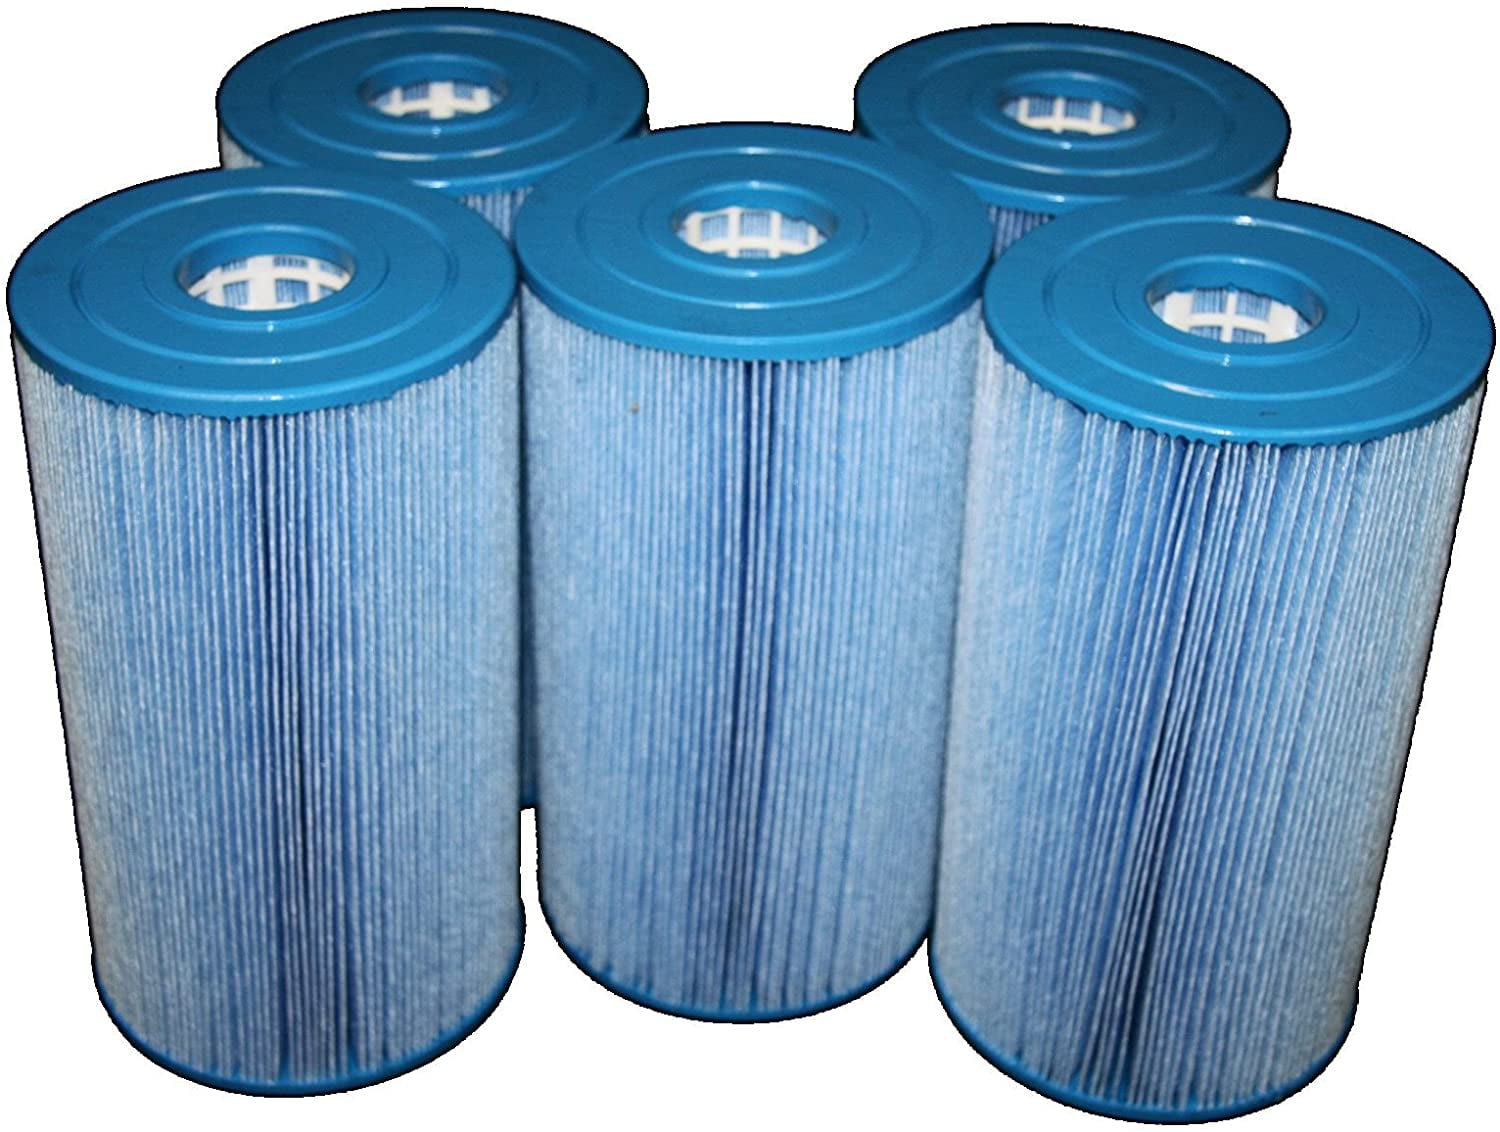 Guardian 610-124 Pool Filters 3 Pack for sale online 